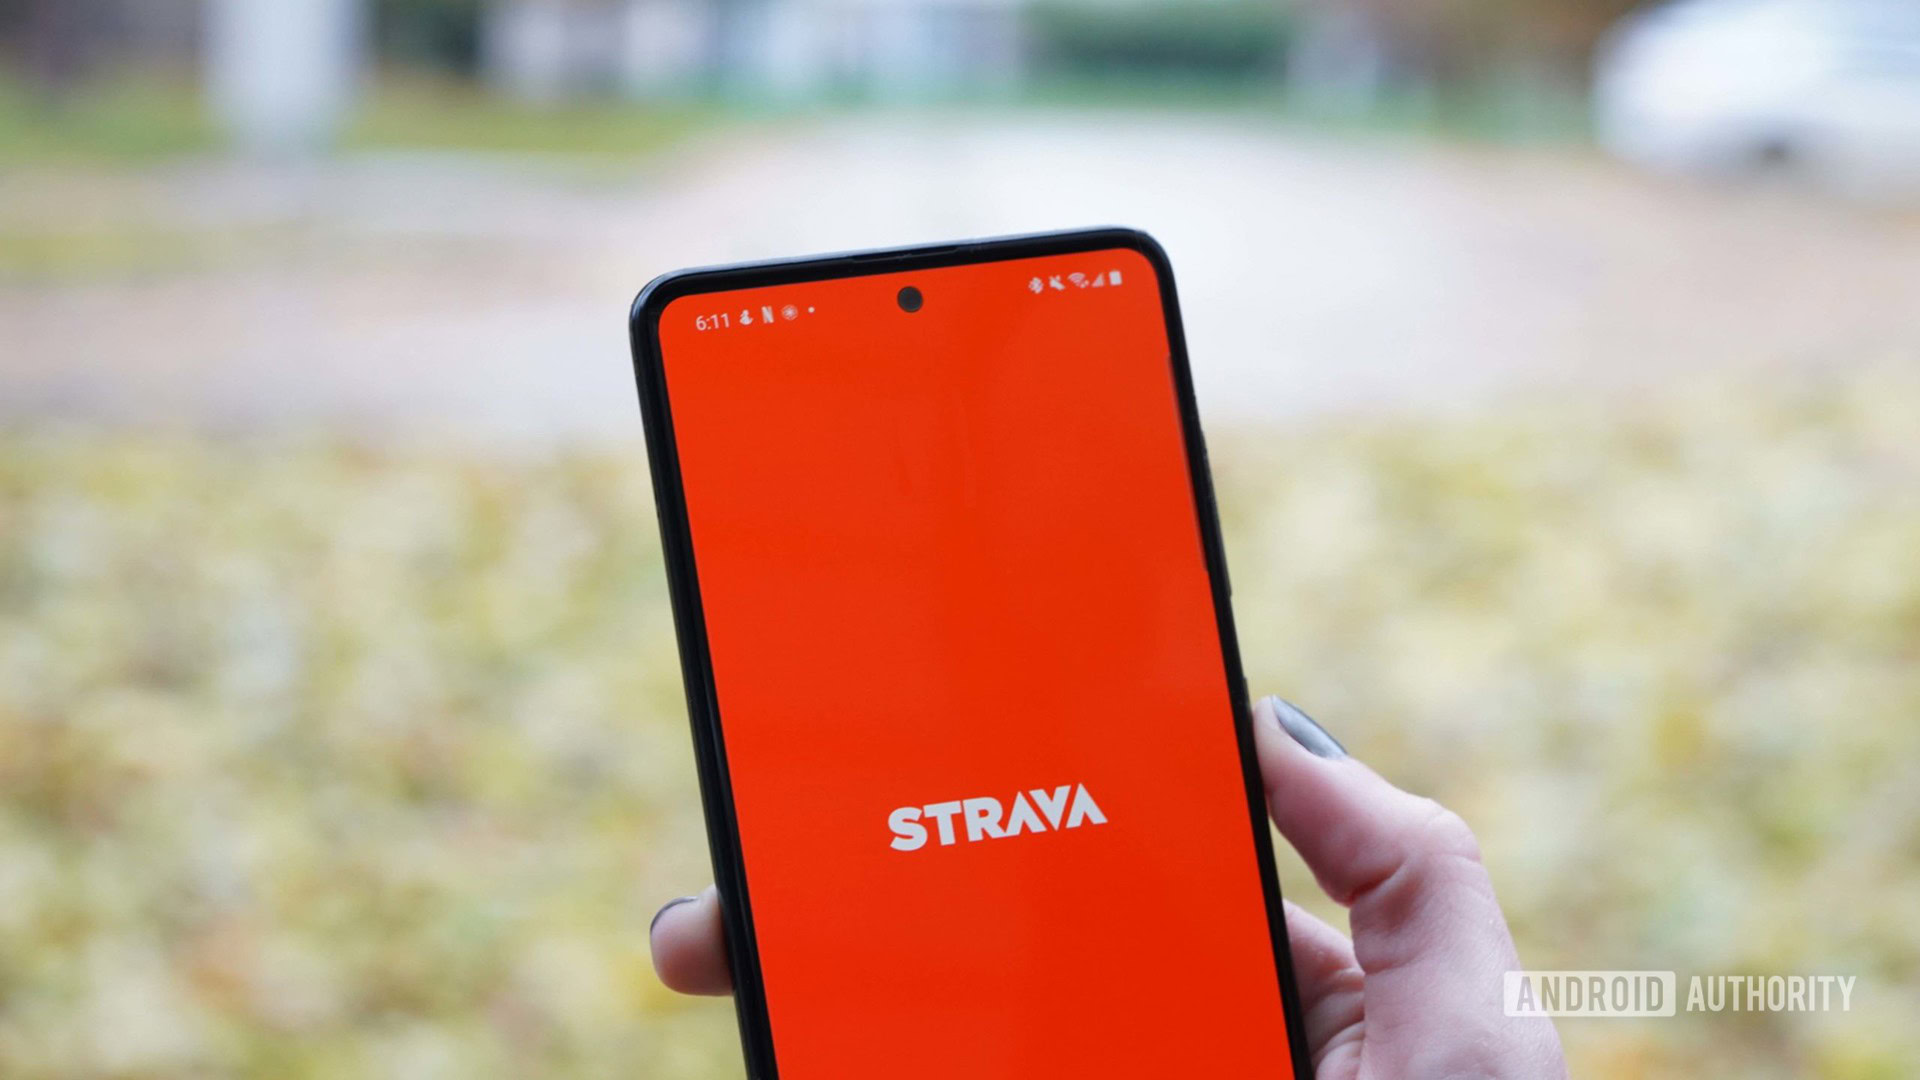 The Strava fitness app home screen is displayed on a Samsung Galaxy A51 on a leaf strewn street.